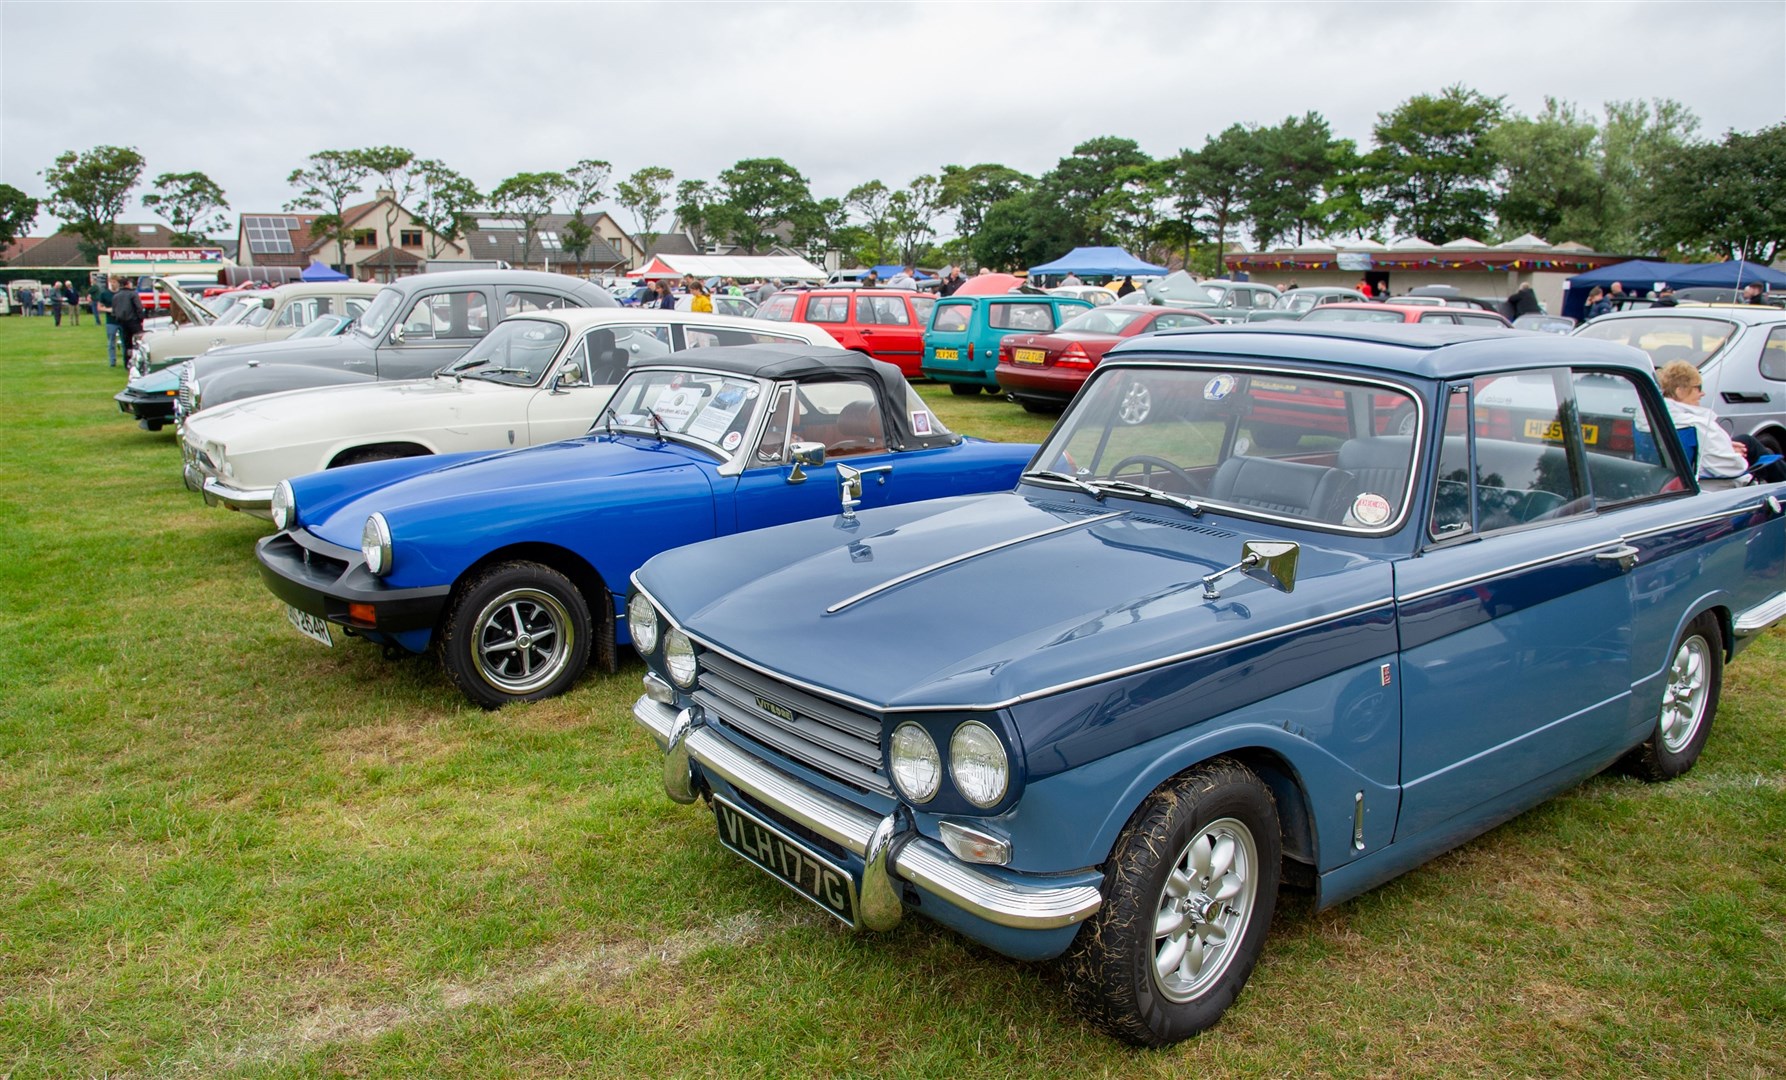 A Triumph Vitesse in a row alongside other classic cars. Picture: Daniel Forsyth